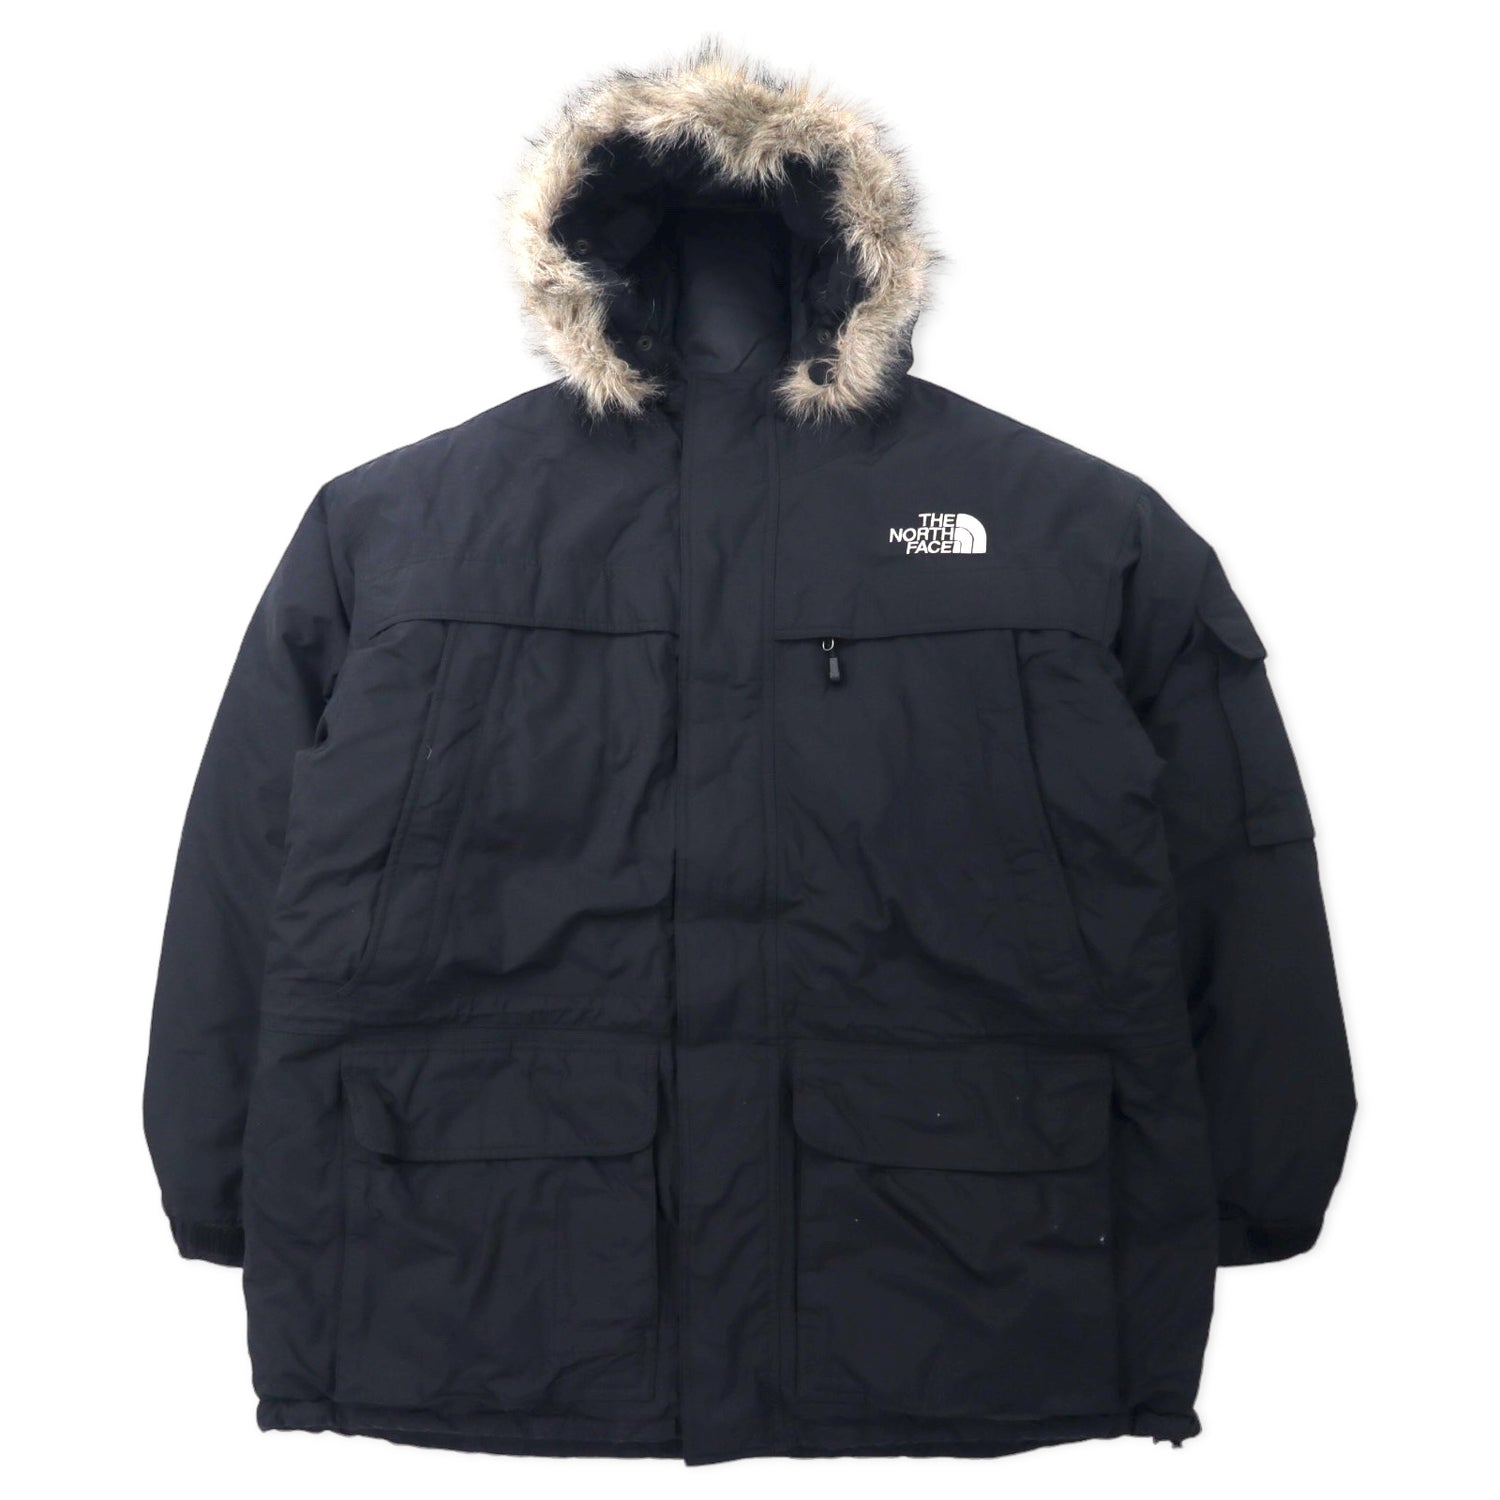 THE NORTH FACE McMade PUFFER PUFFER PUFFER JACKET XL Black Nylon ...